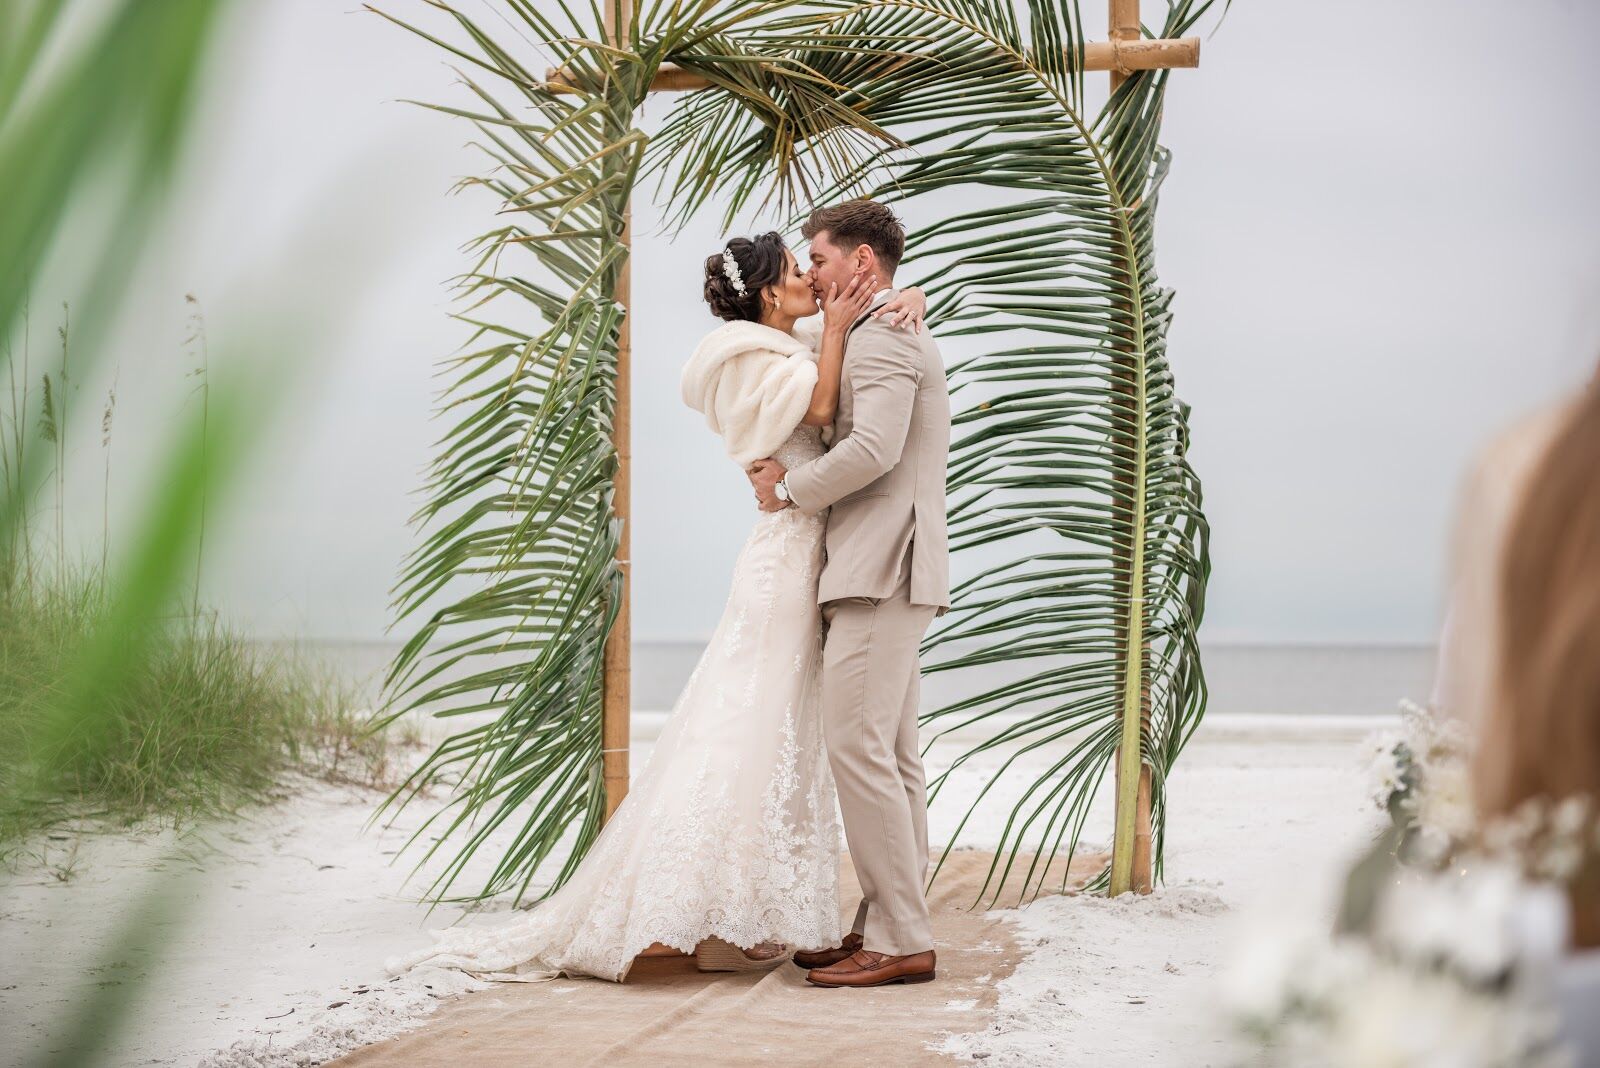 Pink Shell Beach Resort and Marina | Reception Venues - The Knot